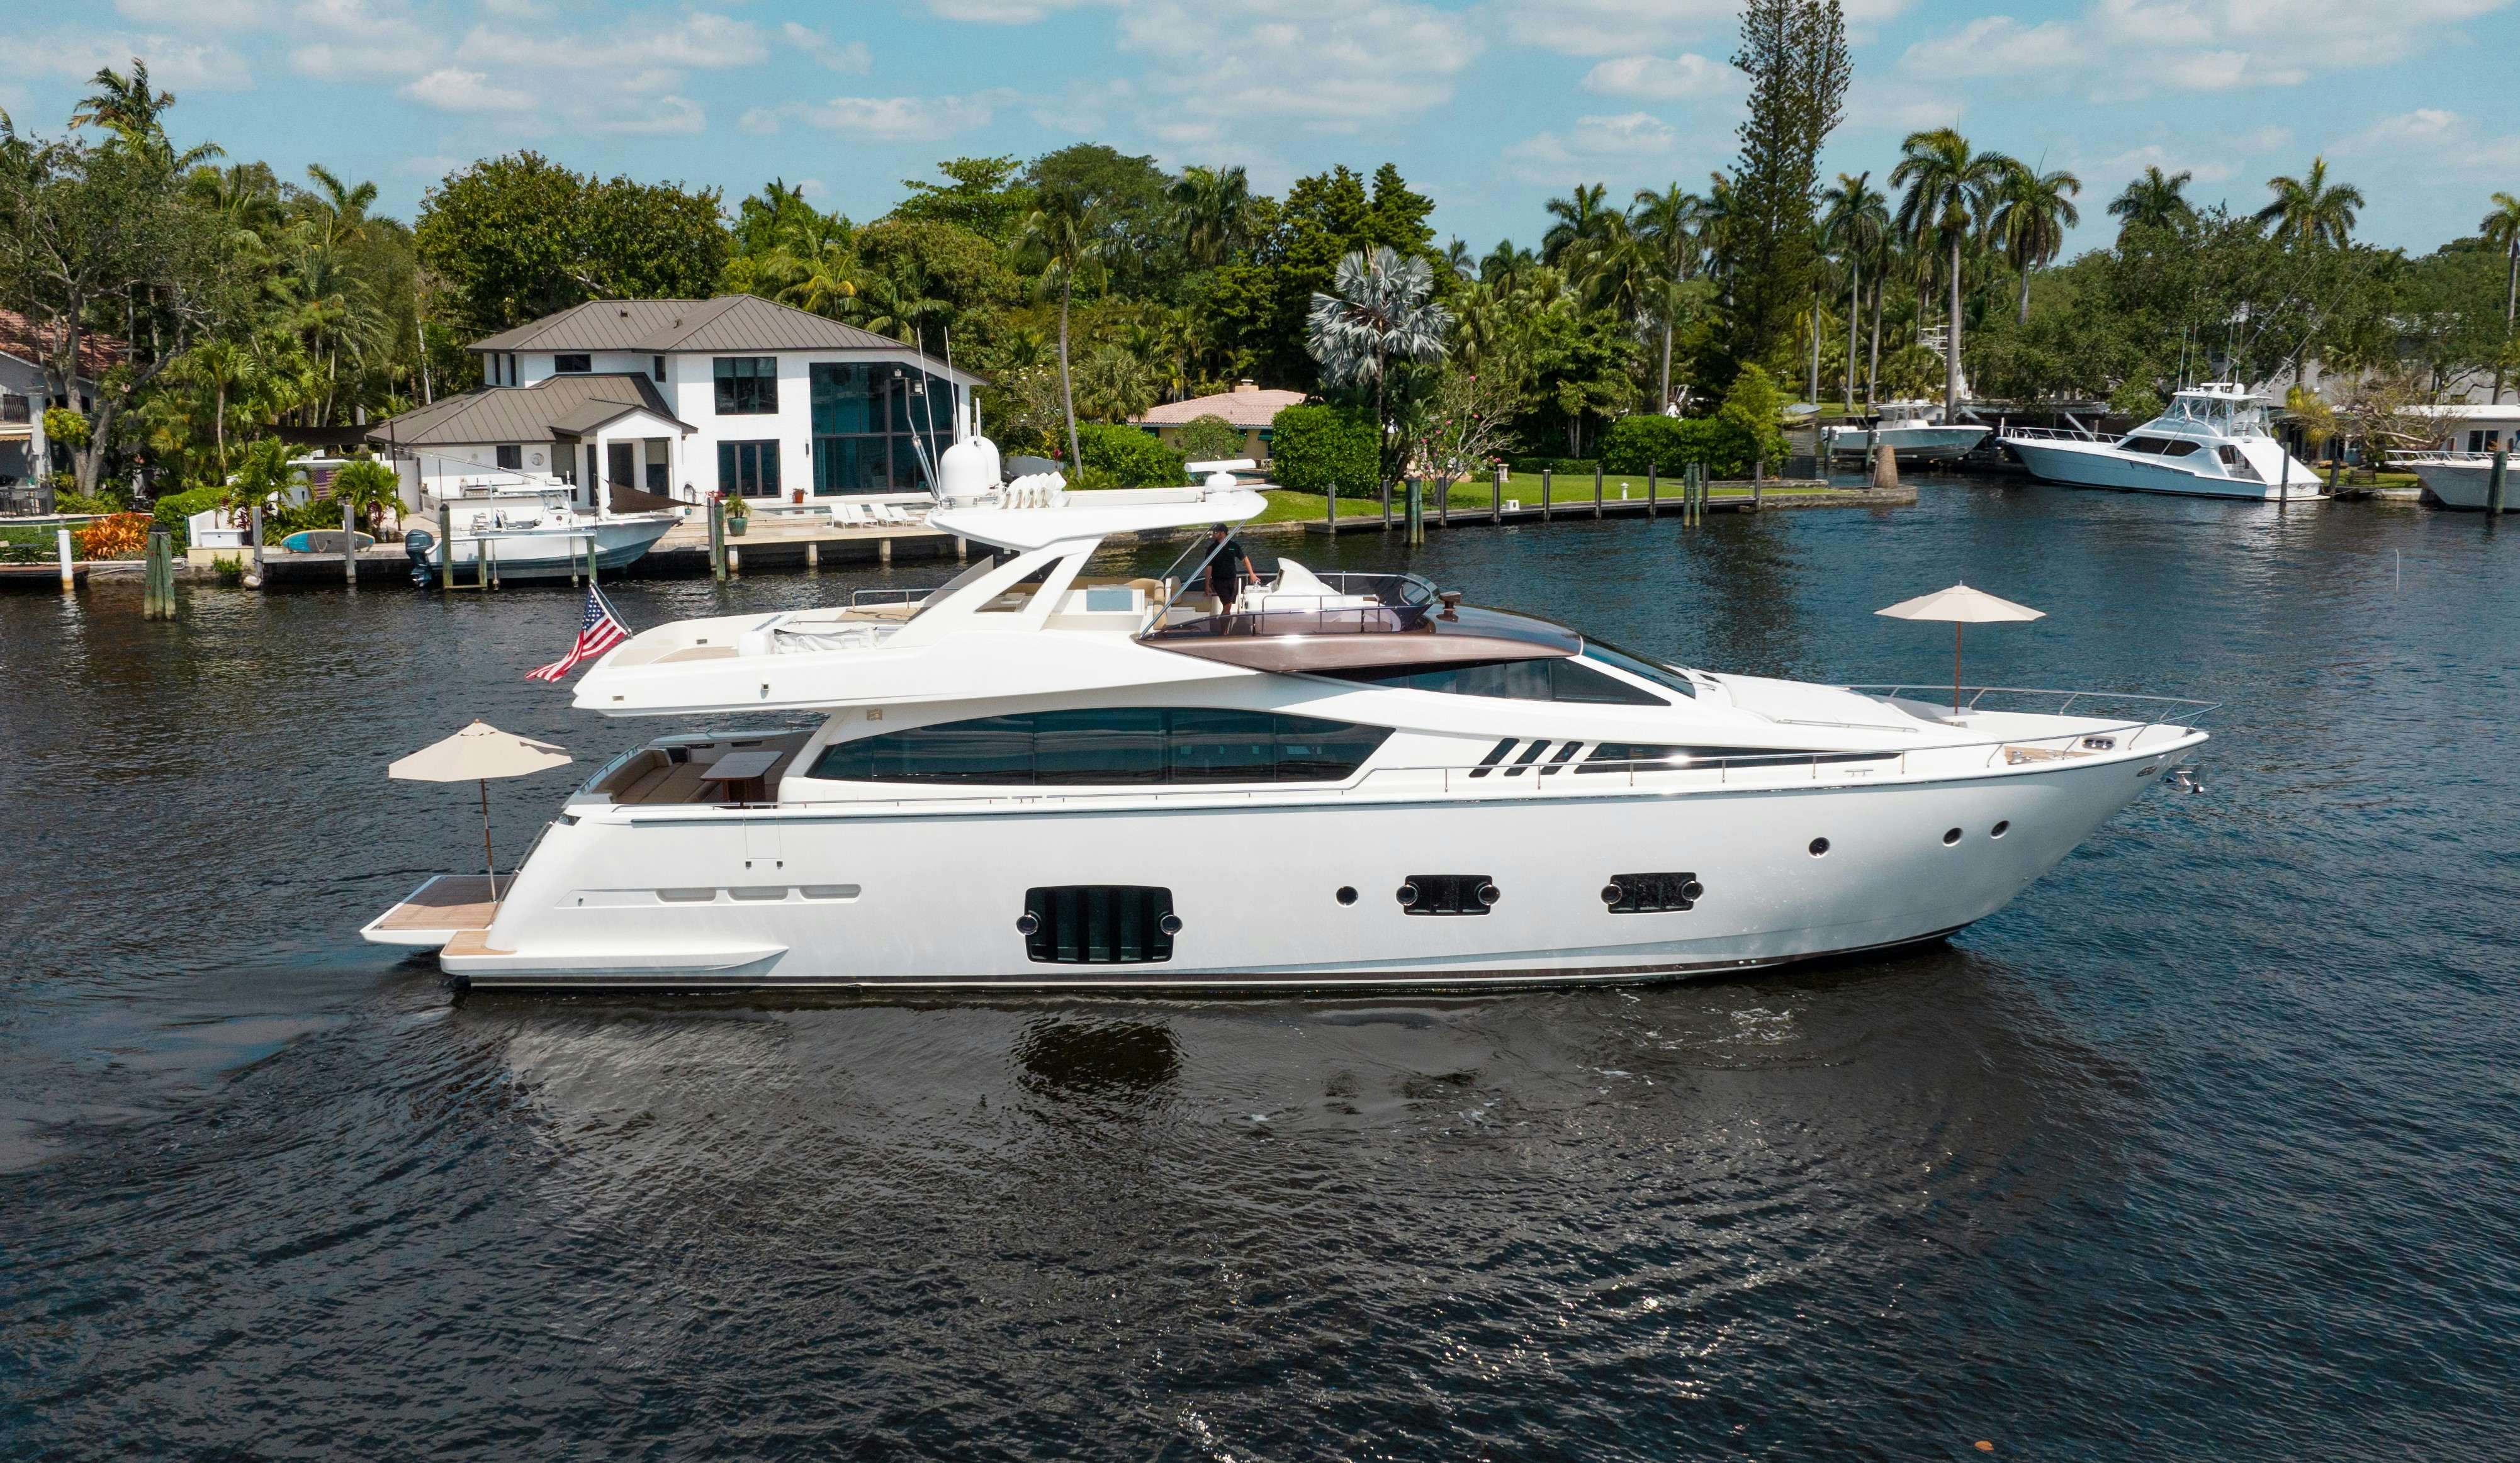 Living life 3
Yacht for Sale